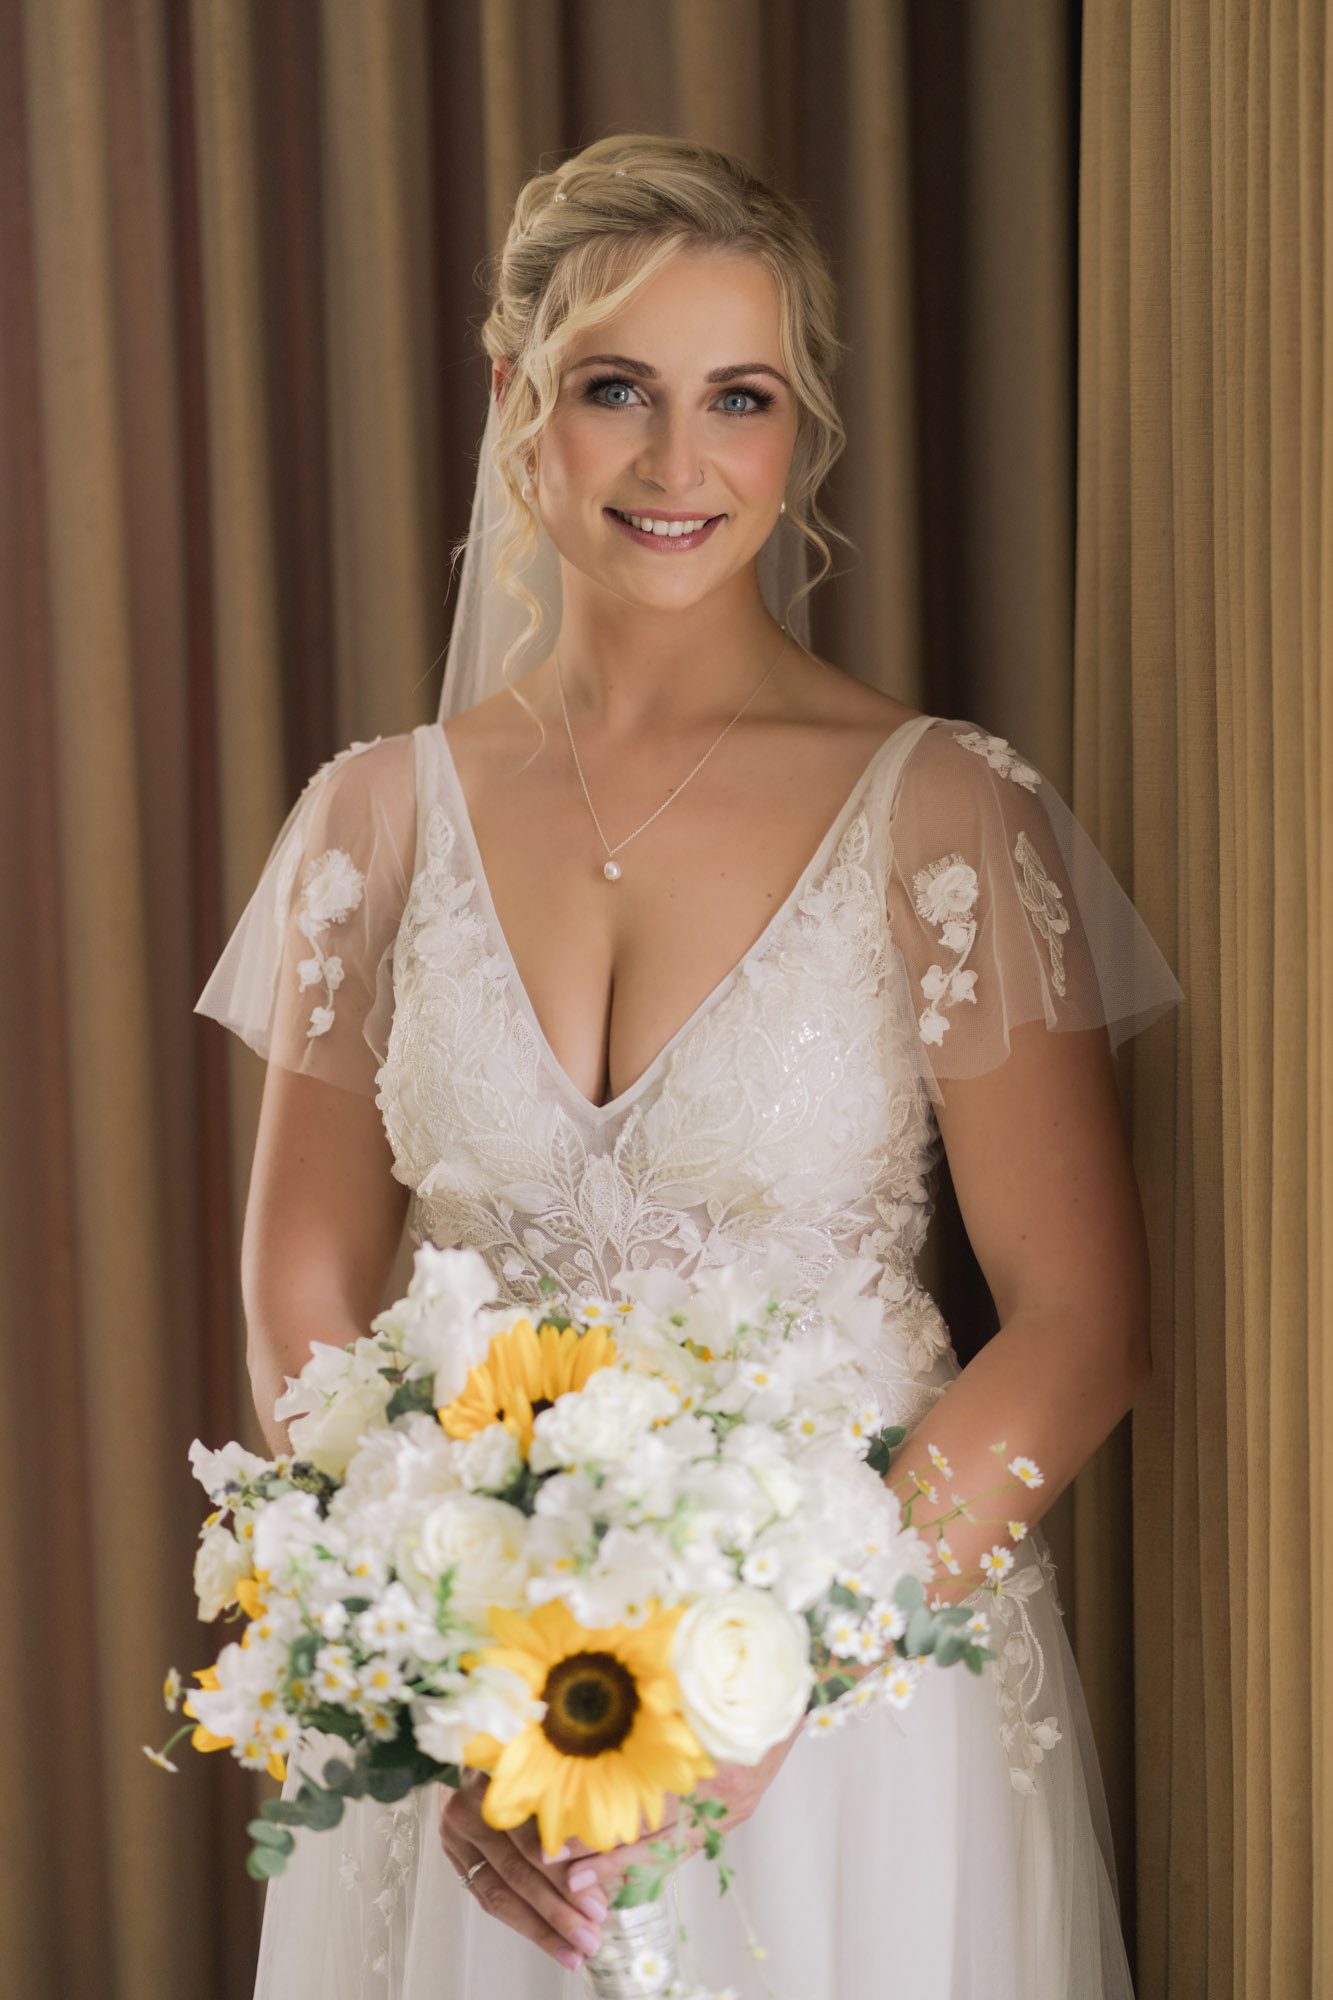 A bride in a beautiful wedding dress holding her bouquet of flowers at Hartsfield Manor.